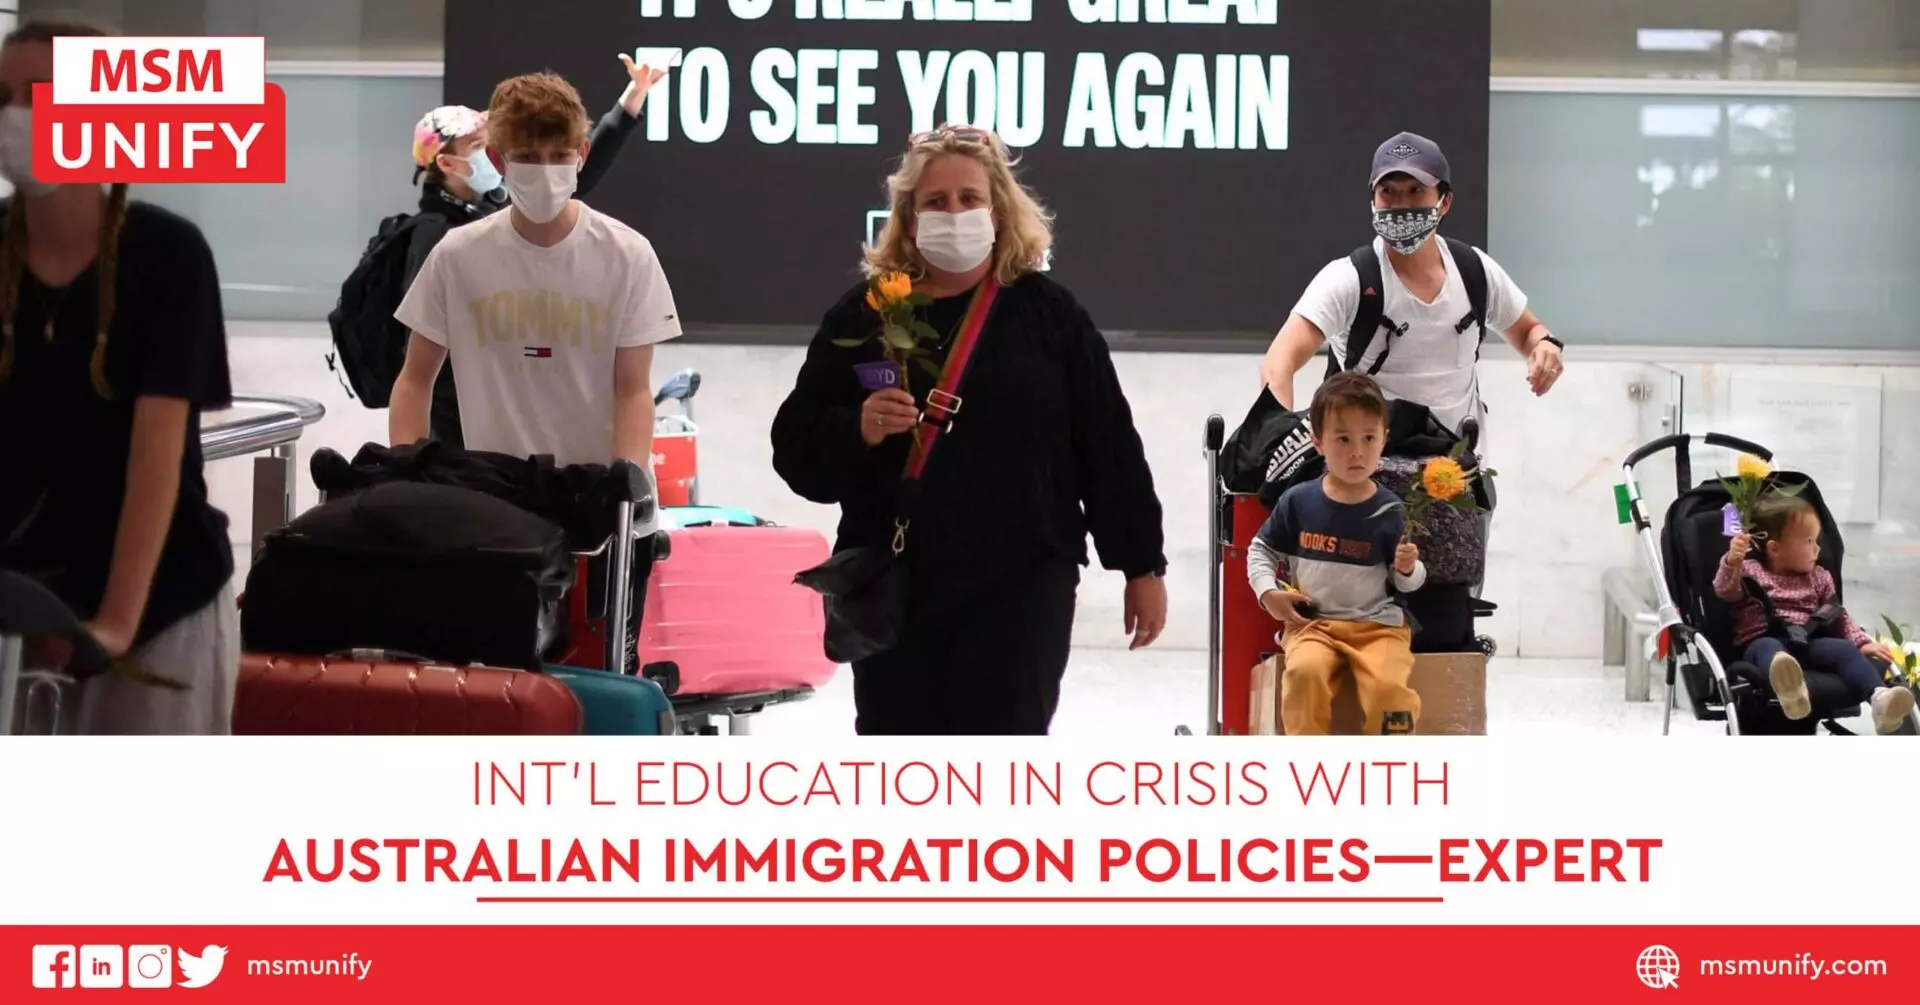 Intl Education In Crisis With Australian Immigration Policies—Expert scaled 1